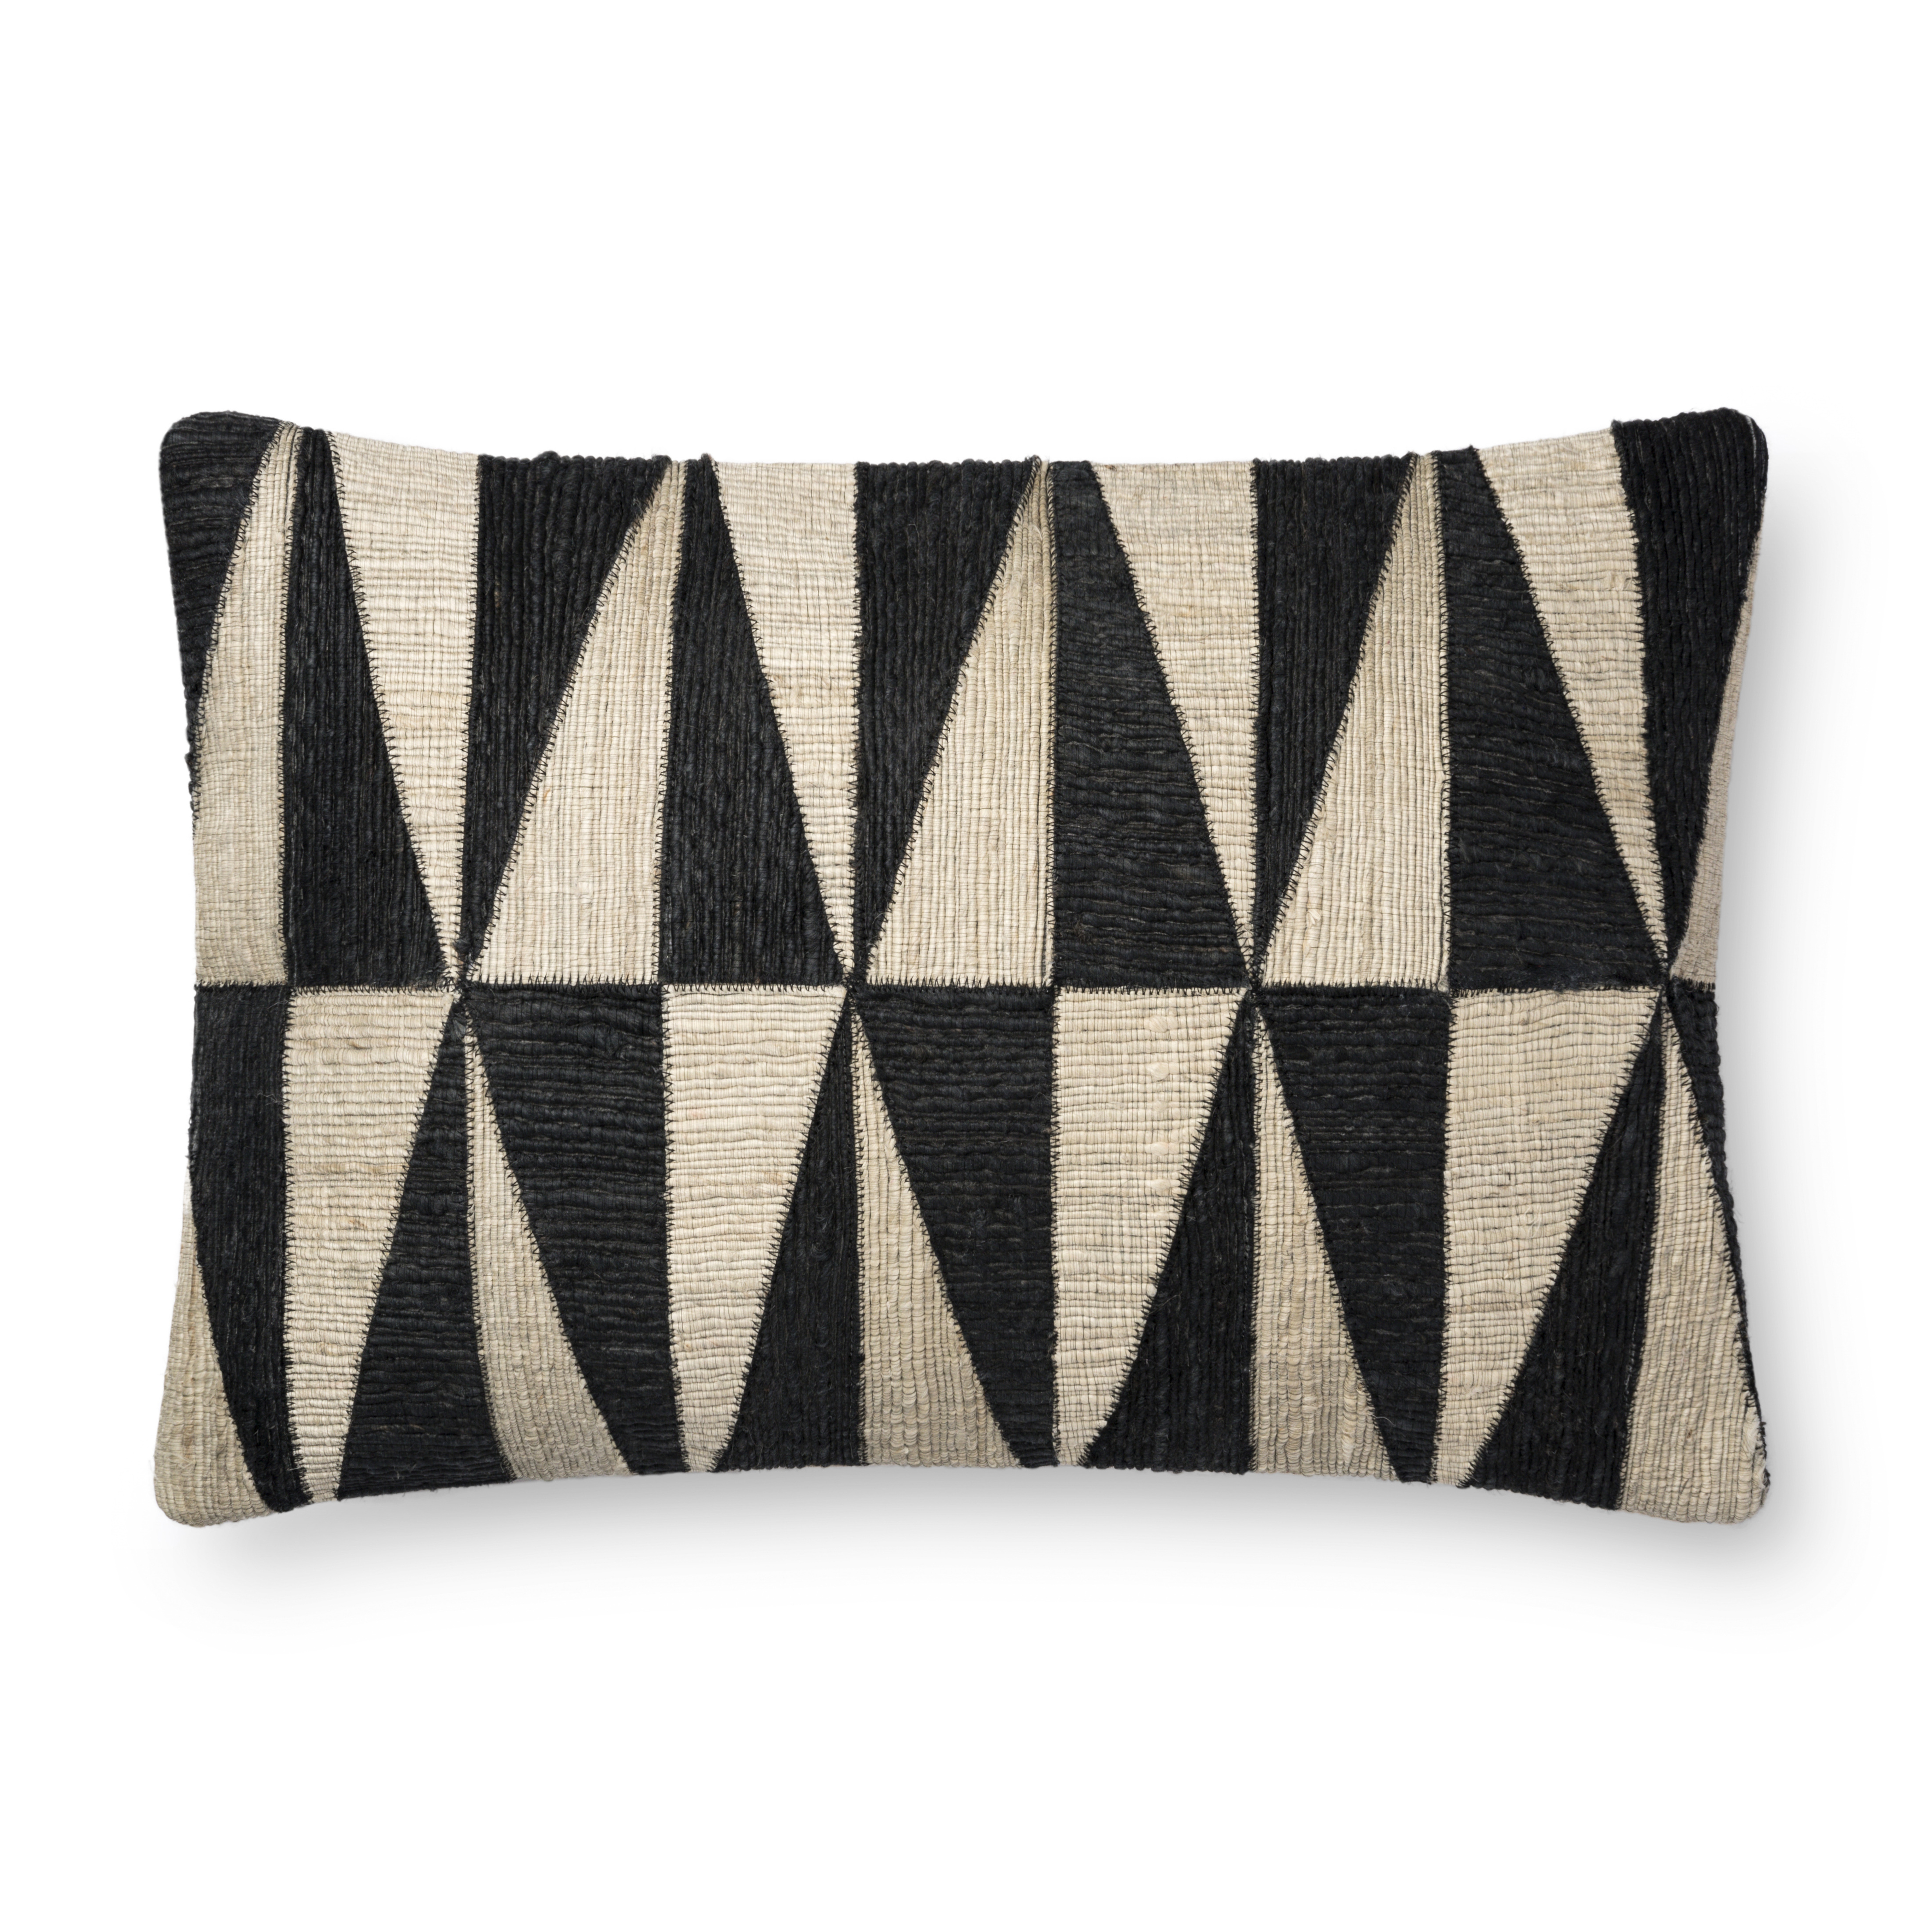 Loloi PILLOWS P0667 Black / Beige 16" x 26" Cover Only - Loloi Rugs